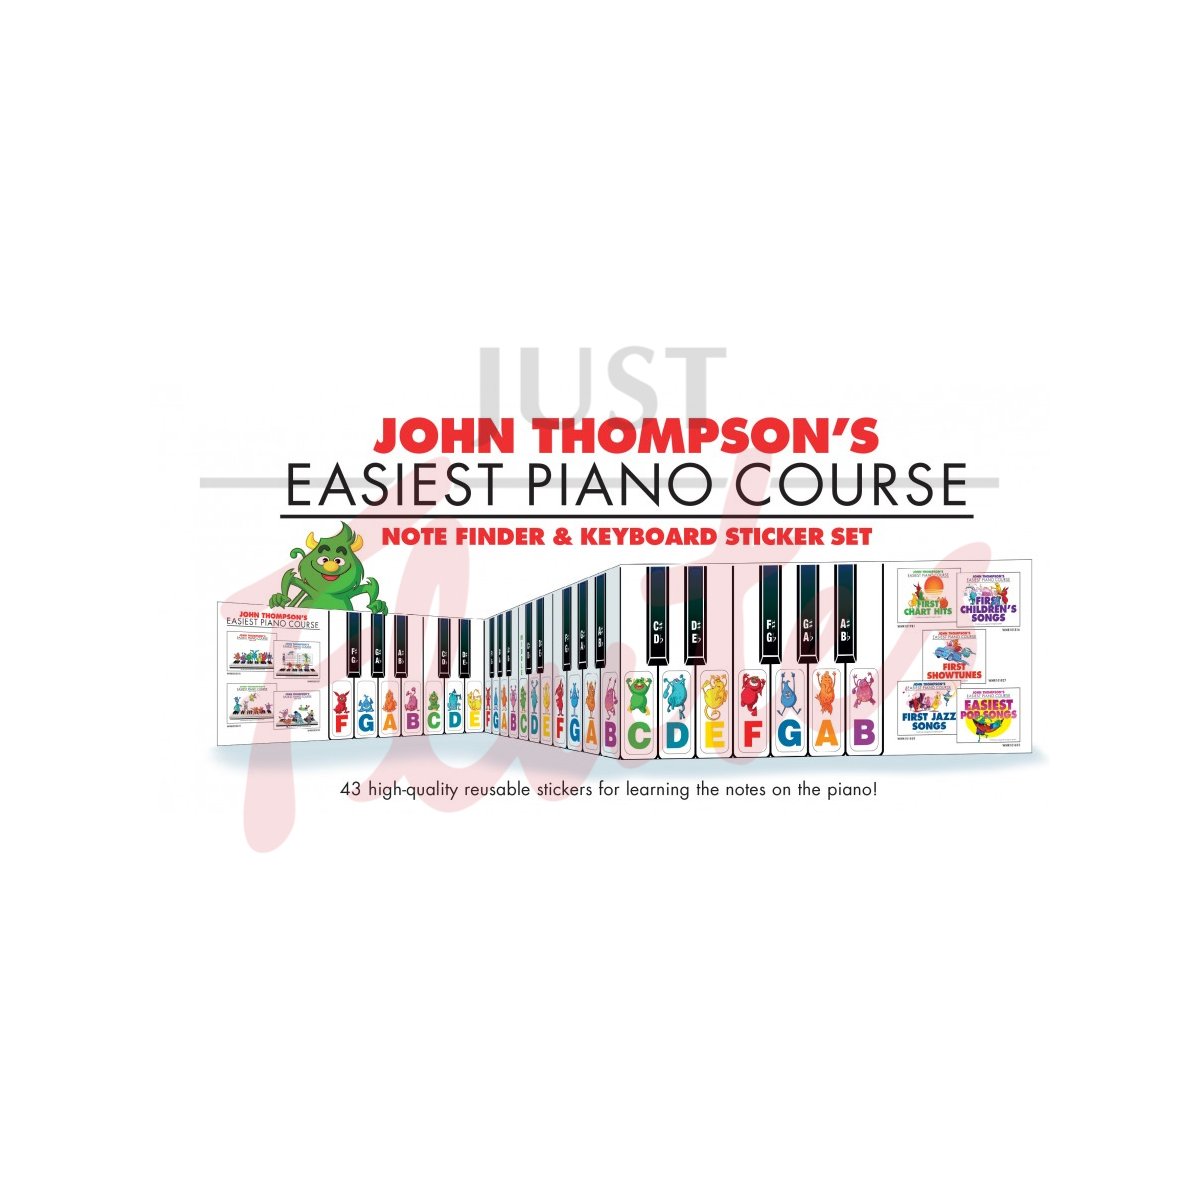 John Thompson's Easiest Piano Course - Note Finder